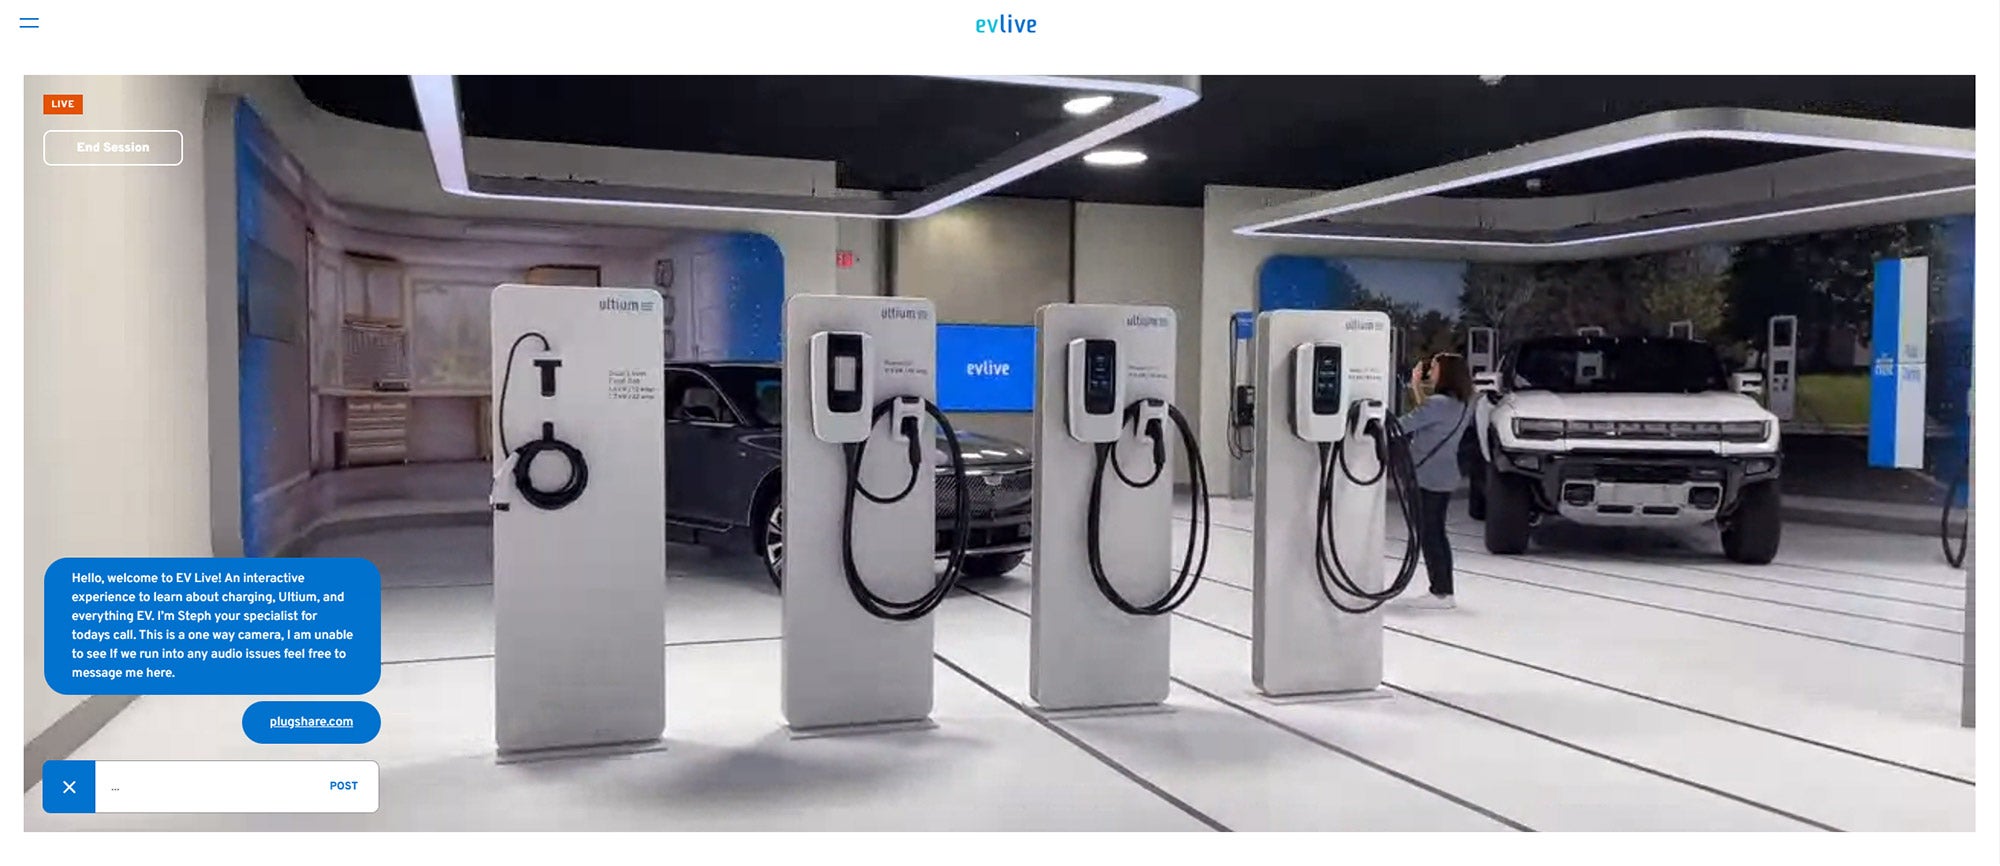 General Motors Is Fighting EV Misinformation With a Video Chat Hotline